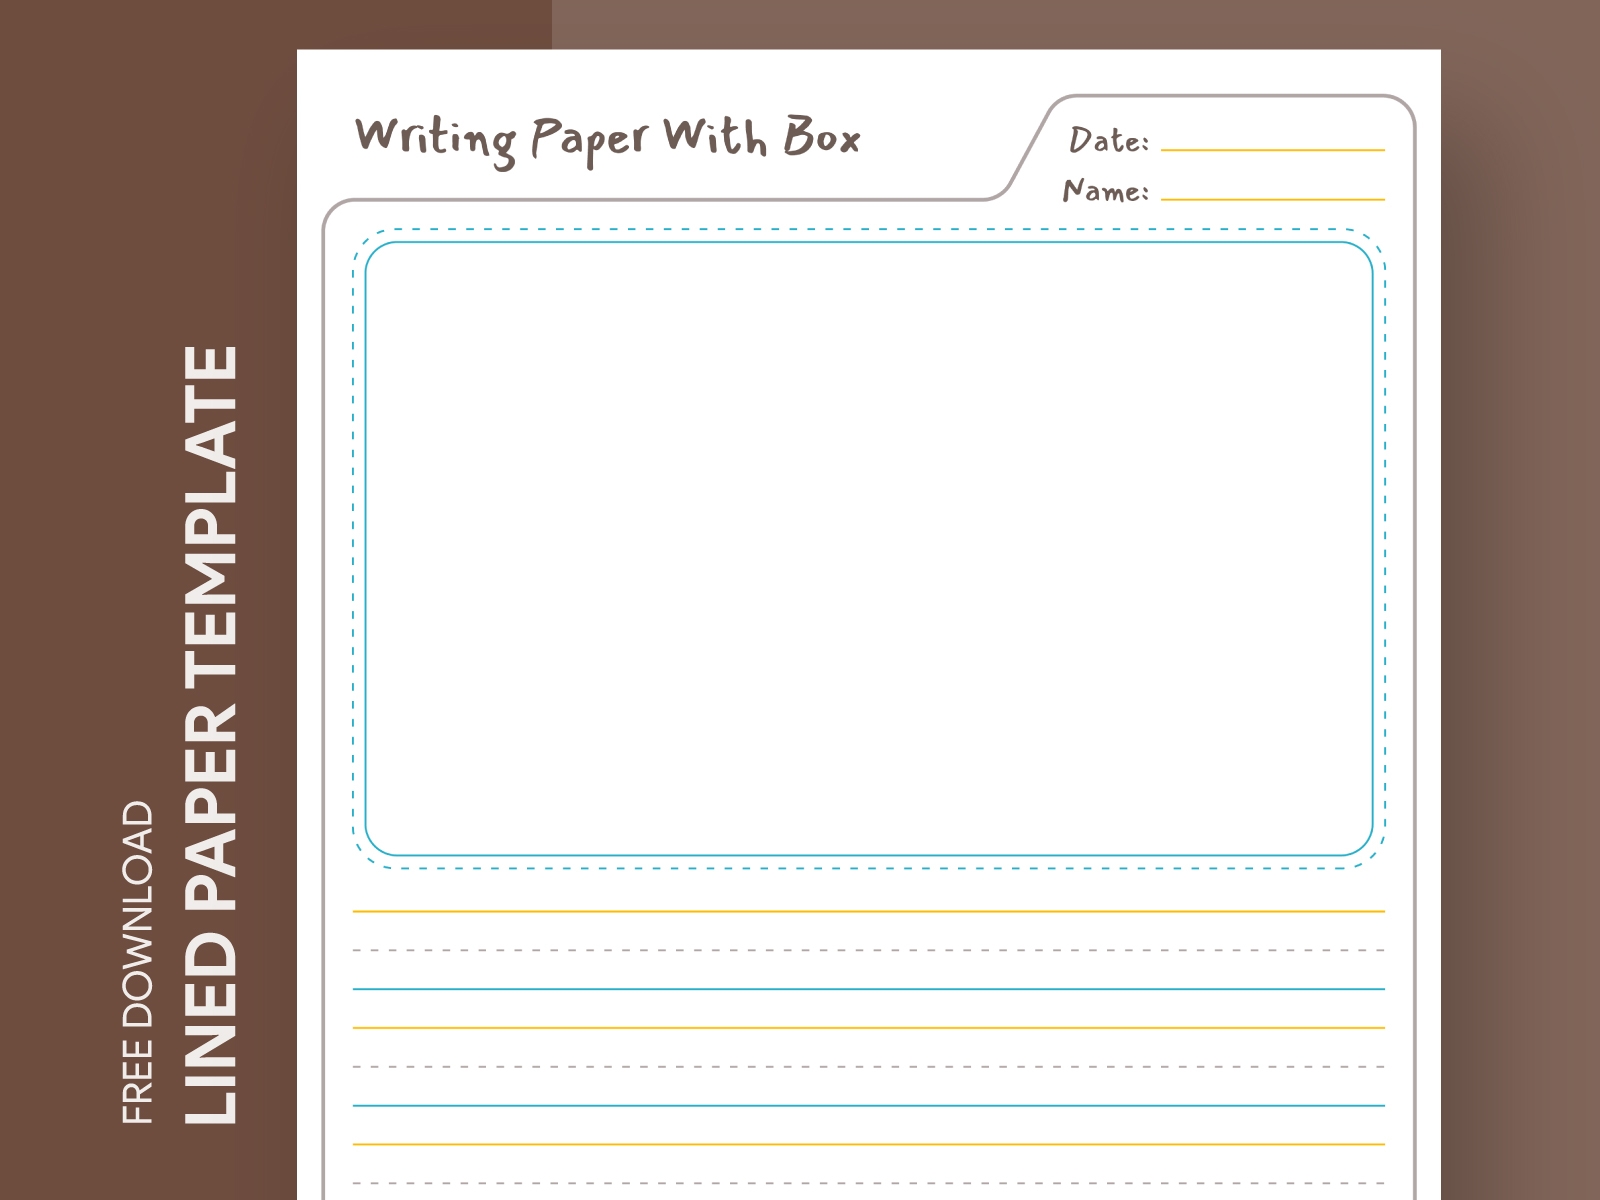 Lined Paper With Picture Box Free Google Docs Template By Free Google Docs Templates Gdoc io On Dribbble